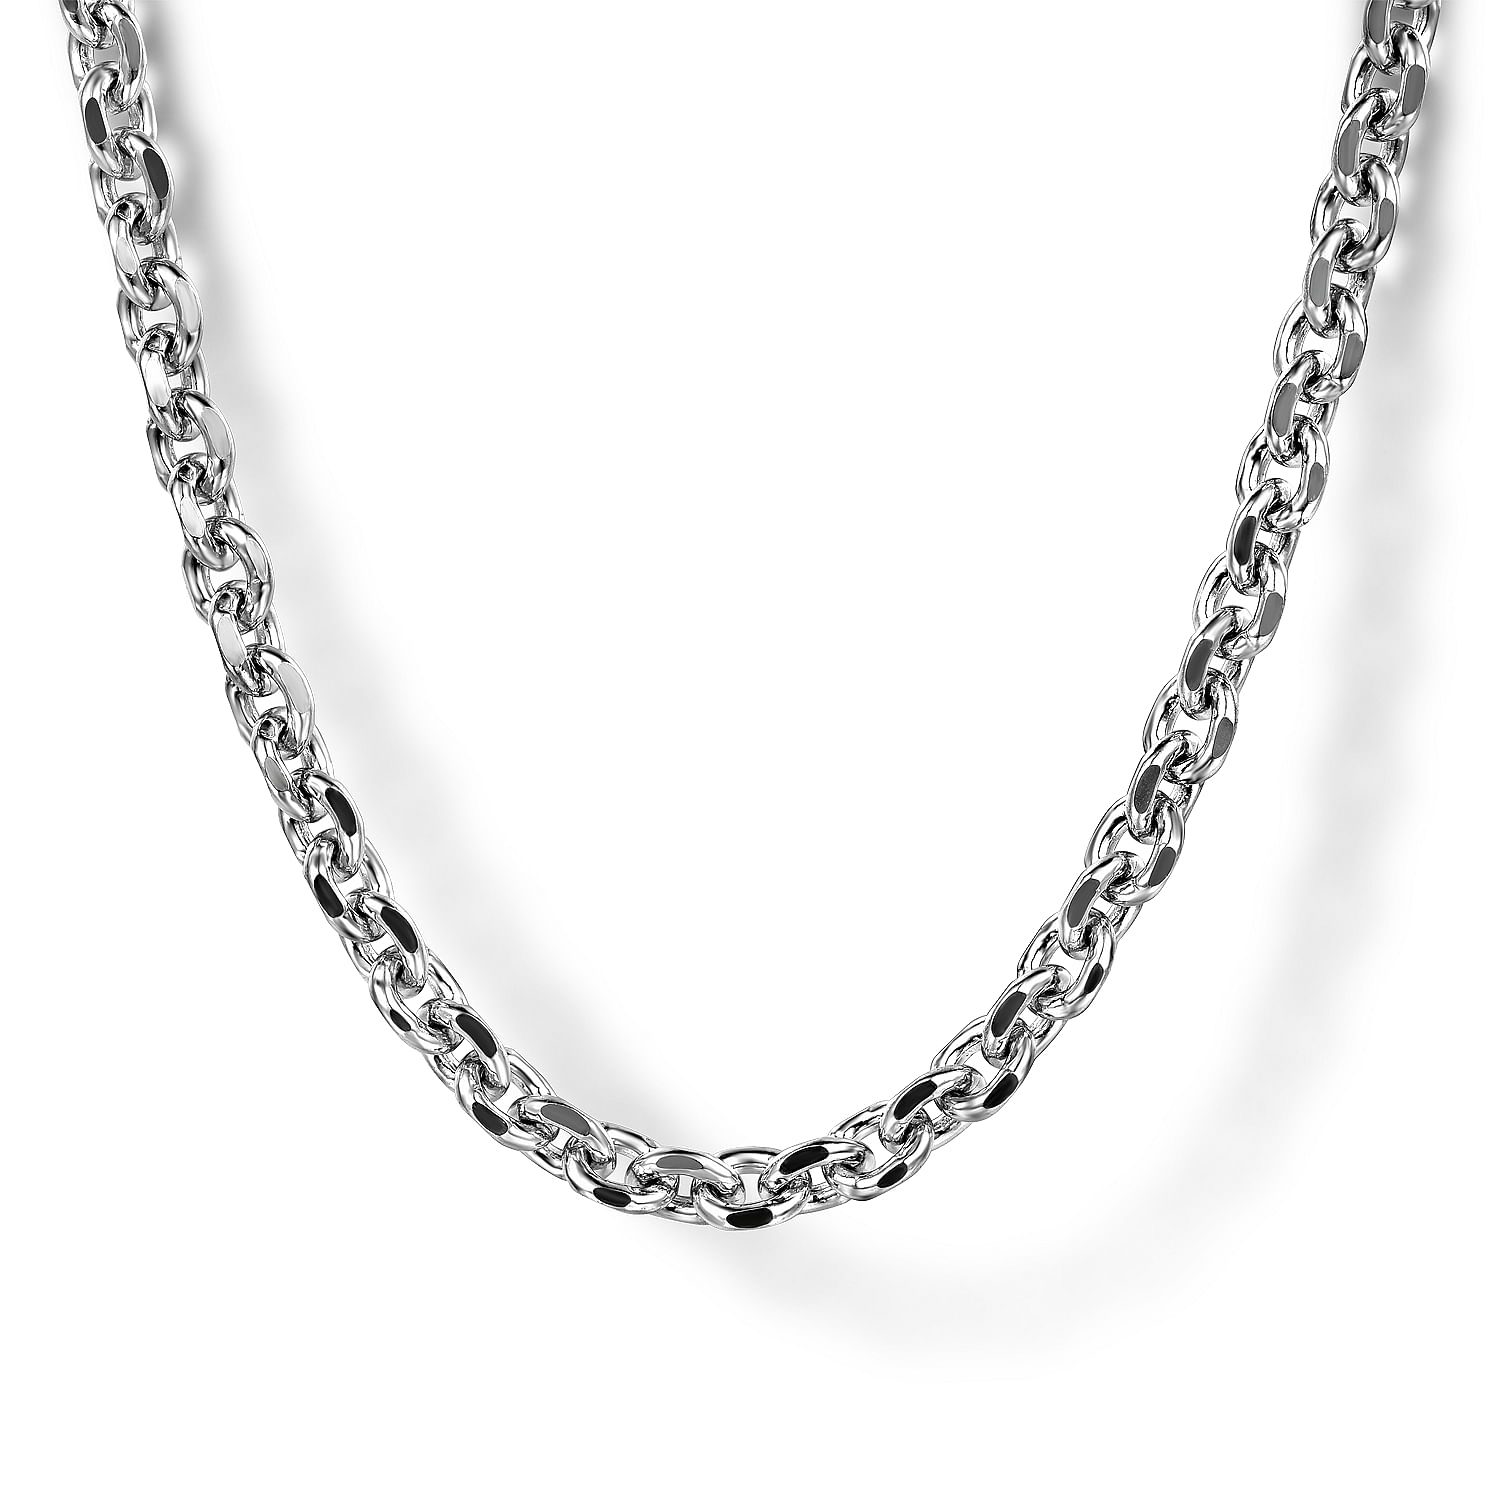 Gabriel - 22 Inch 925 Sterling Silver Men's Link Chain Necklace 